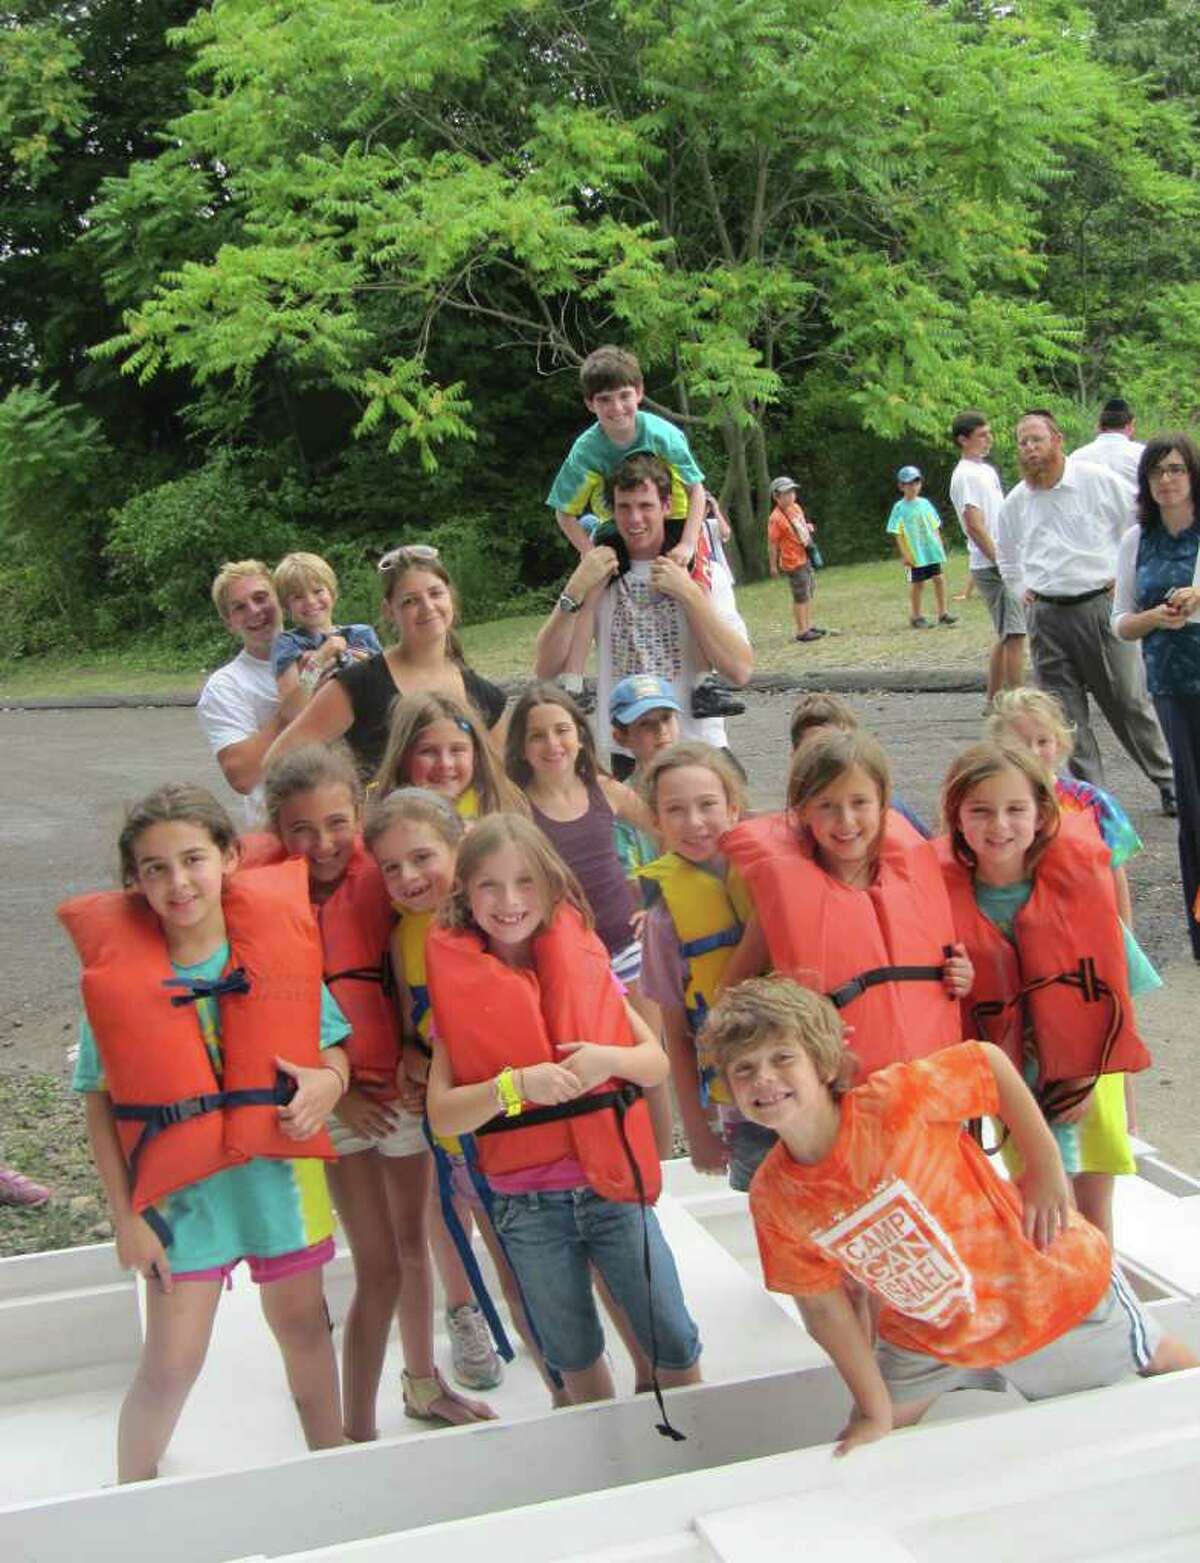 Children enrolled in Camp Gan Israel of Westport made their way onto the Saugatuck River Wednesday afternoon in boats they built themselves with instruction from Curtis Tucker, founder of Kids Aboard Workshops, Inc. In this photo, children pose for the camera minutes before boarding their boats.